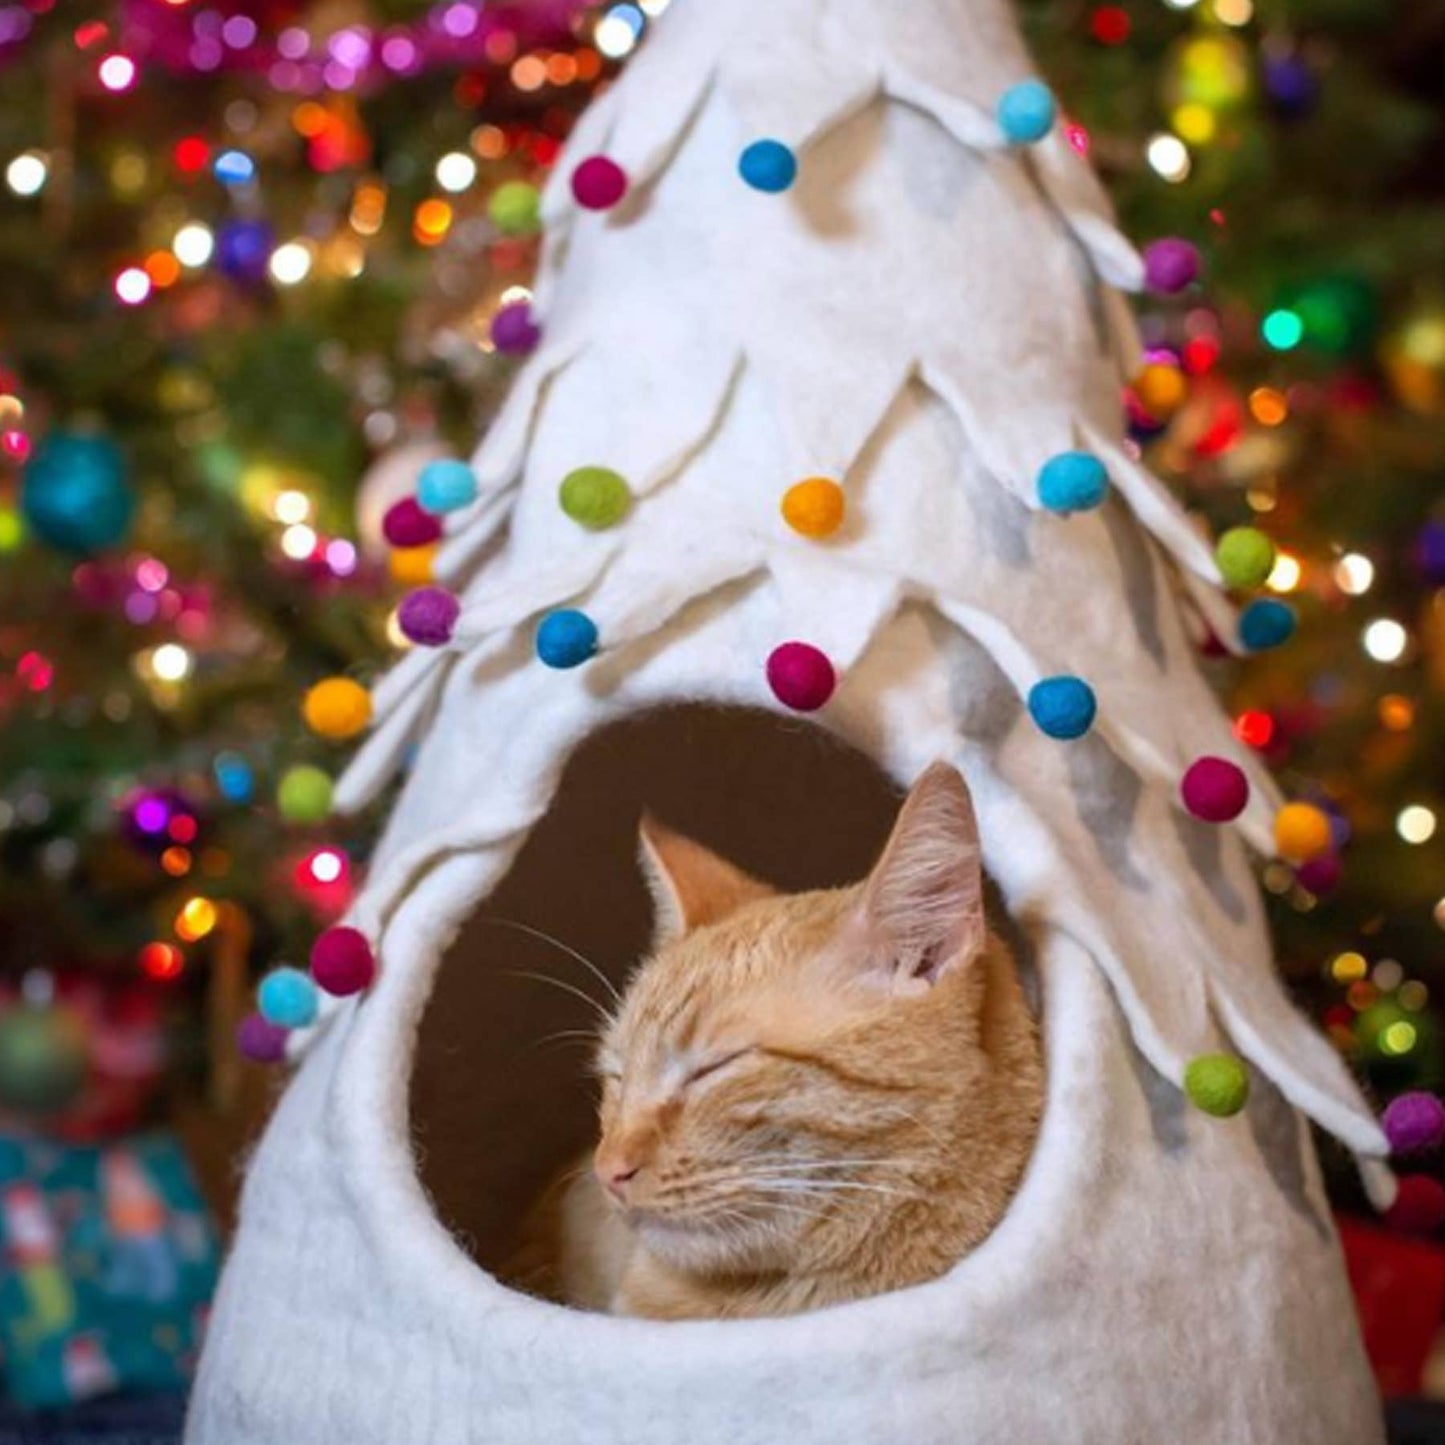 Holiday Tree Wool Pet Cave: White FINAL SALE